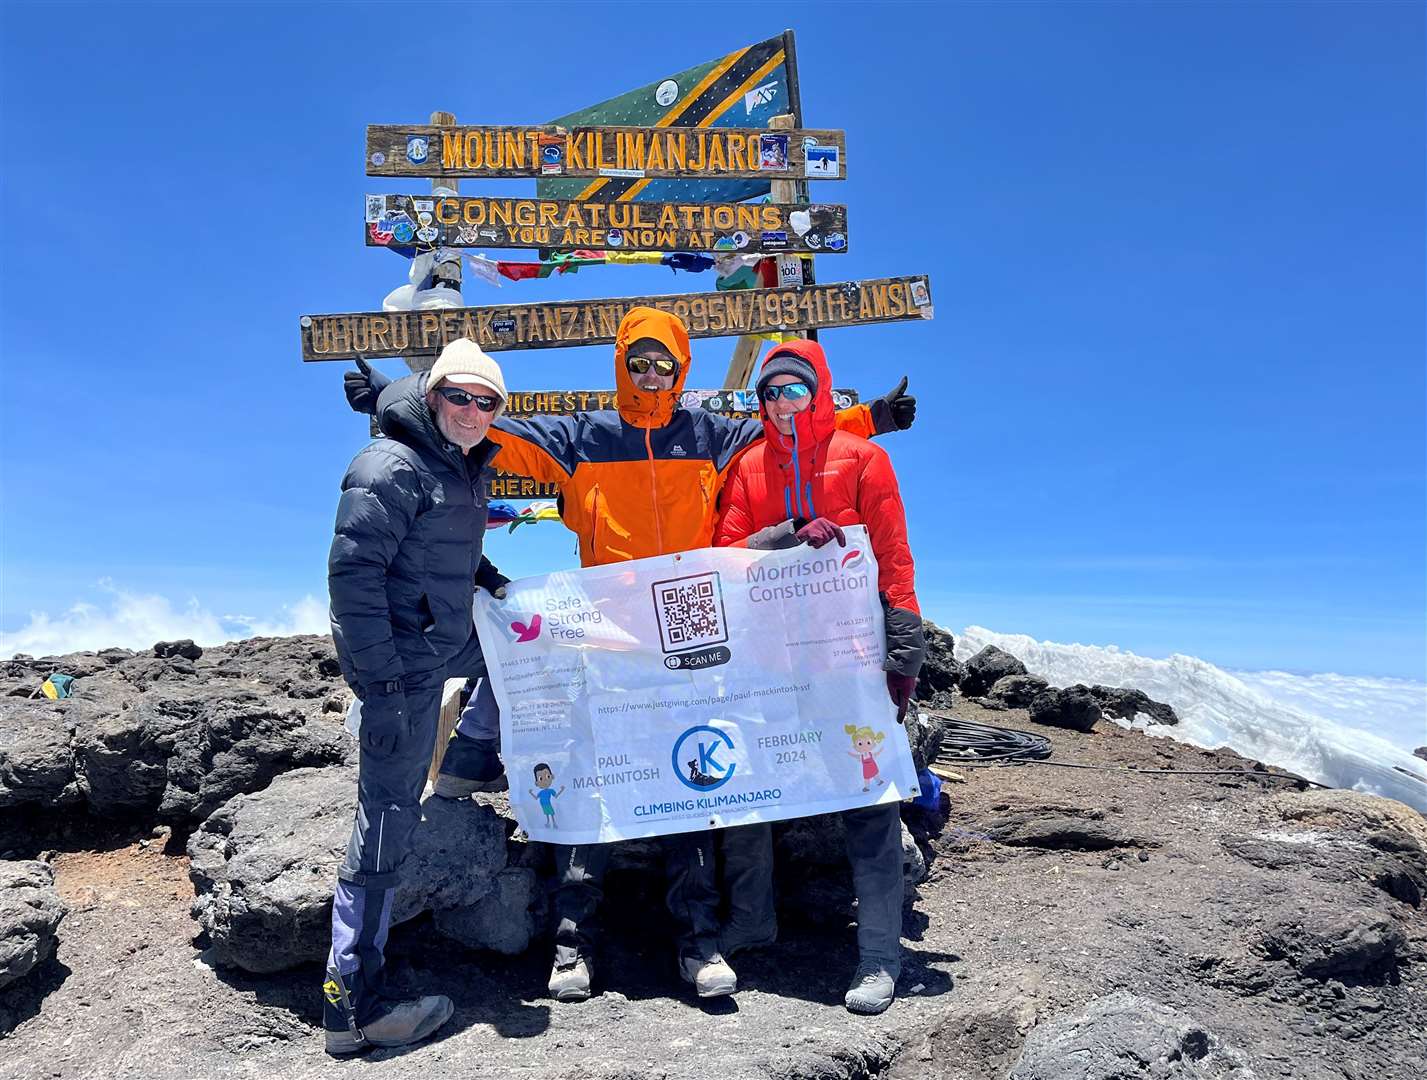 Paul Mackintosh, centre, with other members of the climbing group, at the top of Mount Kilimanjaro.